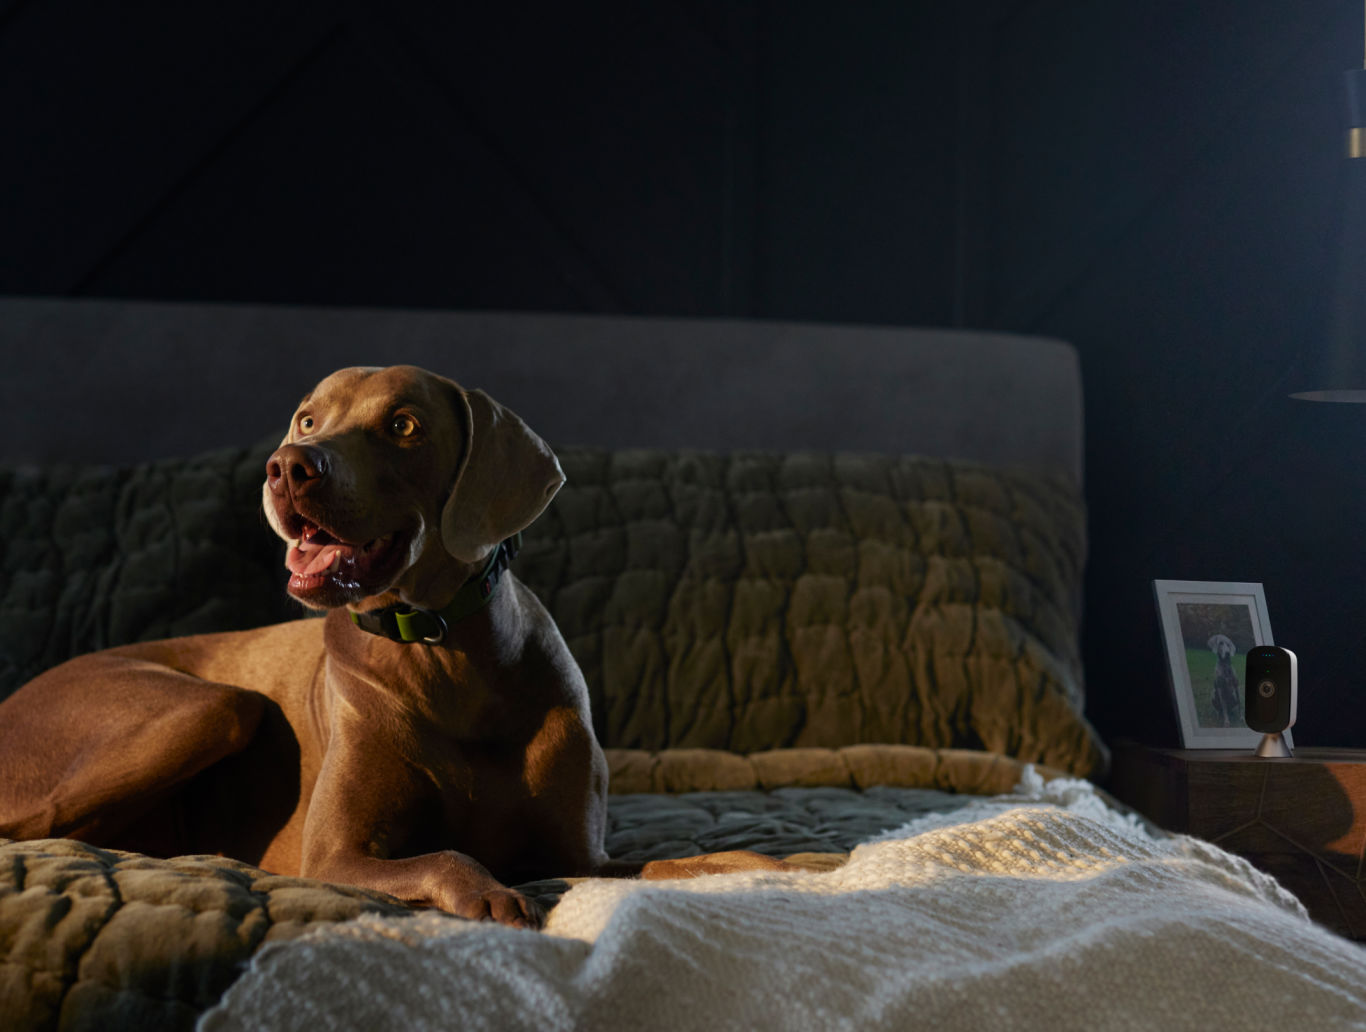 A dog sits upright on a bed in a dimly lit bedroom with ecobee SmartCamera visible on a nightstand in the background